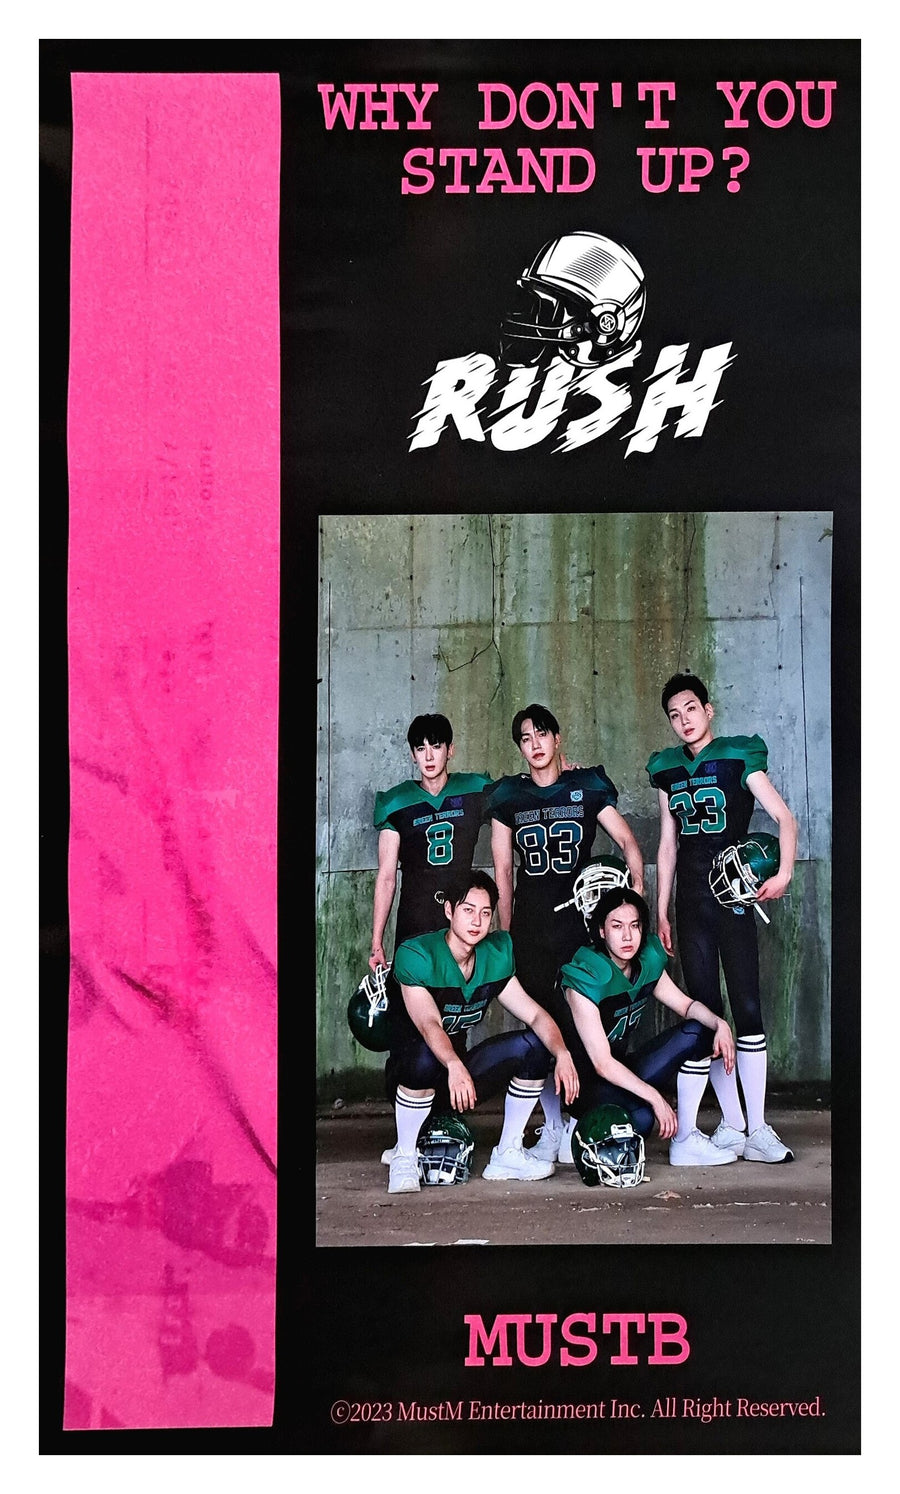 MUSTB Single Album RUSH (Air-Kit Ver.) Official Poster - Photo Concept 1